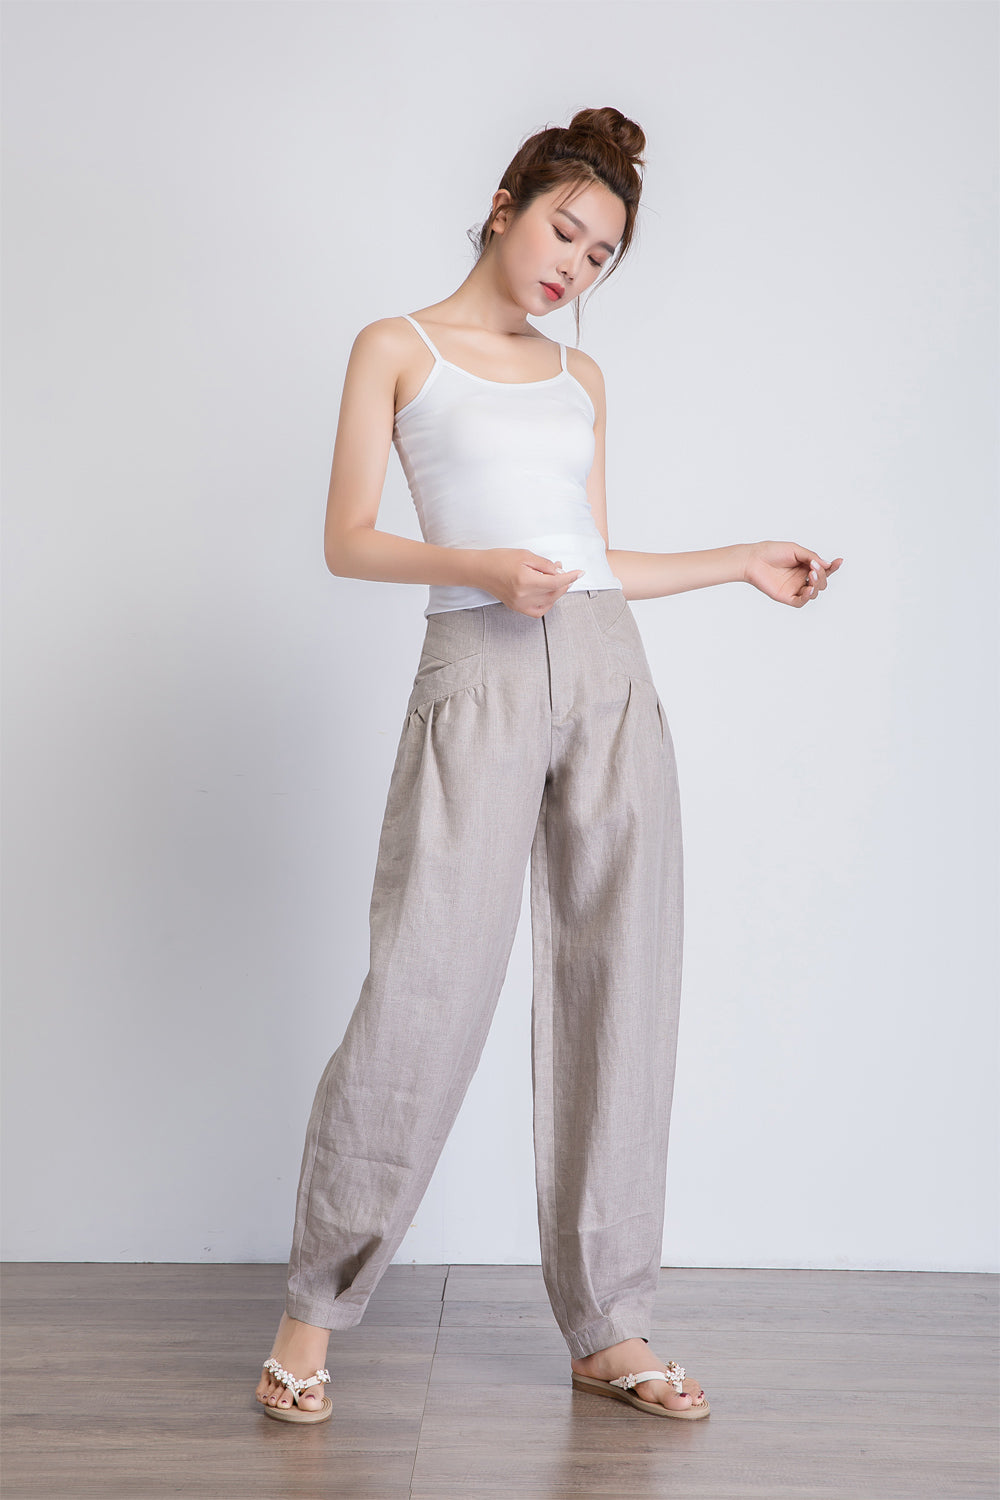 Womens Oversized Denim Cargo Pants With Multi Pockets Relaxed Streetwear  Ladies Cargo Trousers Primark For Women Style #230823 From B121144507,  $27.55 | DHgate.Com